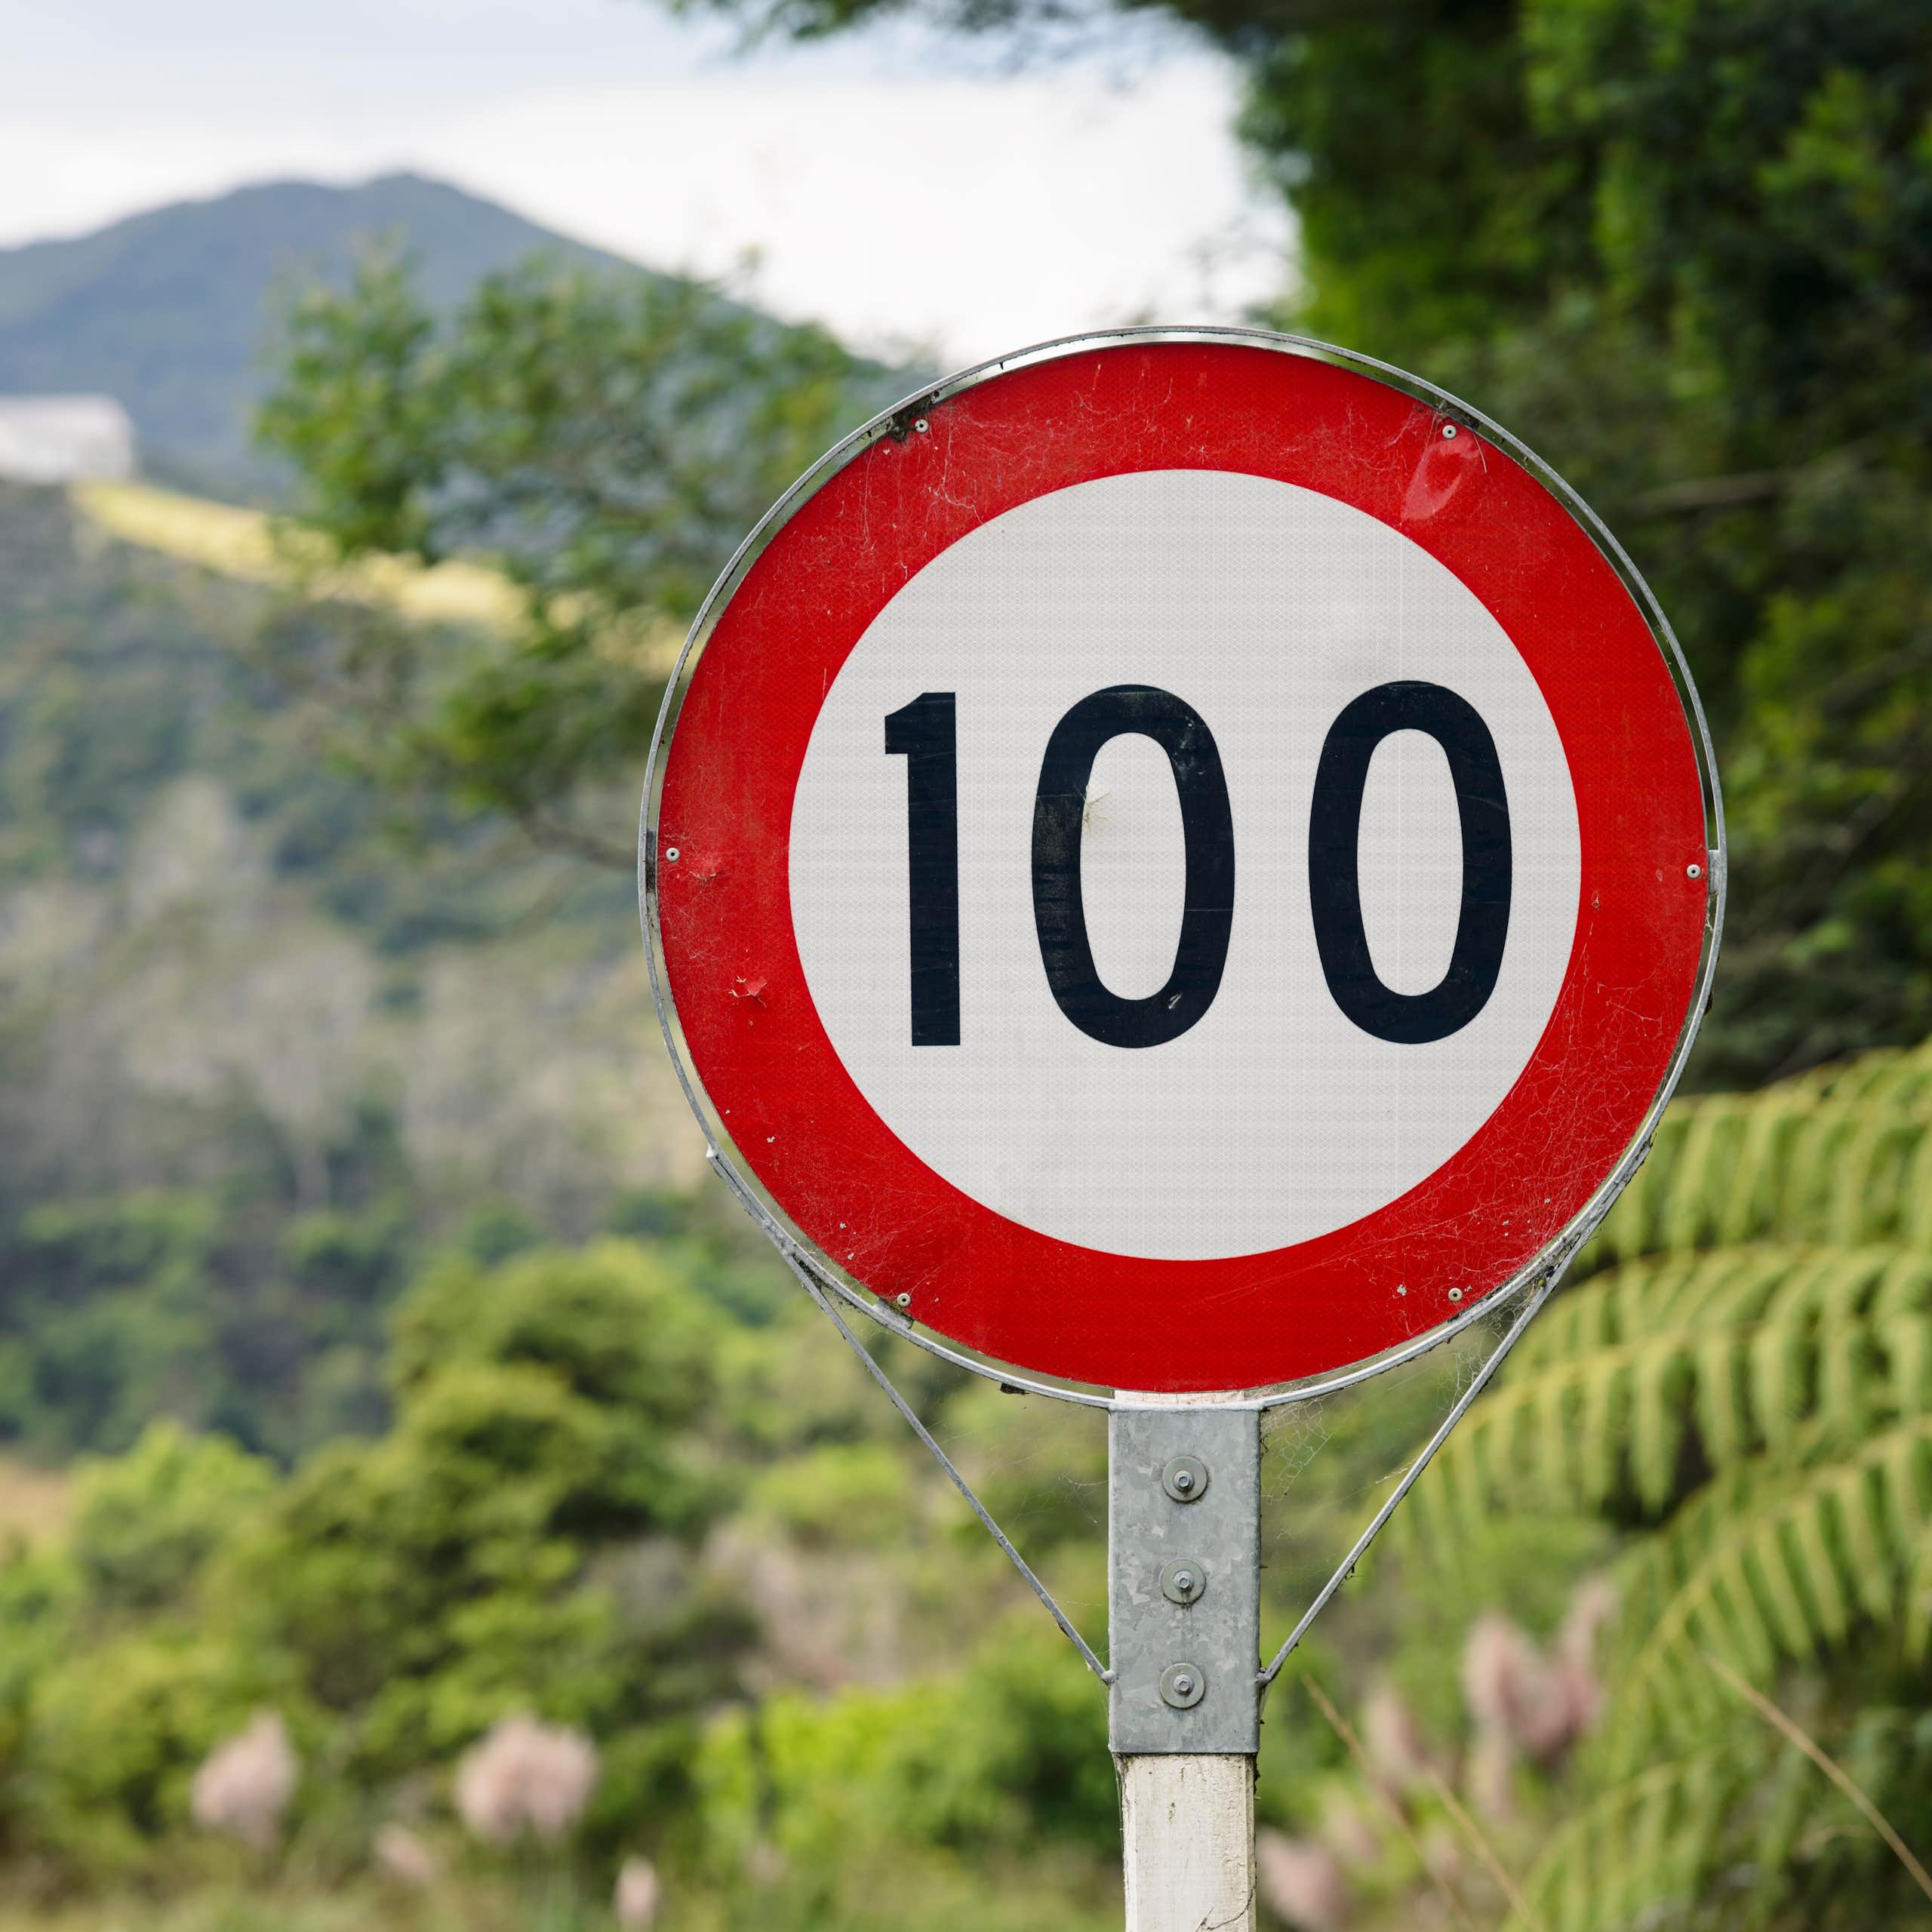 A 100 Km/hour speed limit sign in rural New Zealand.